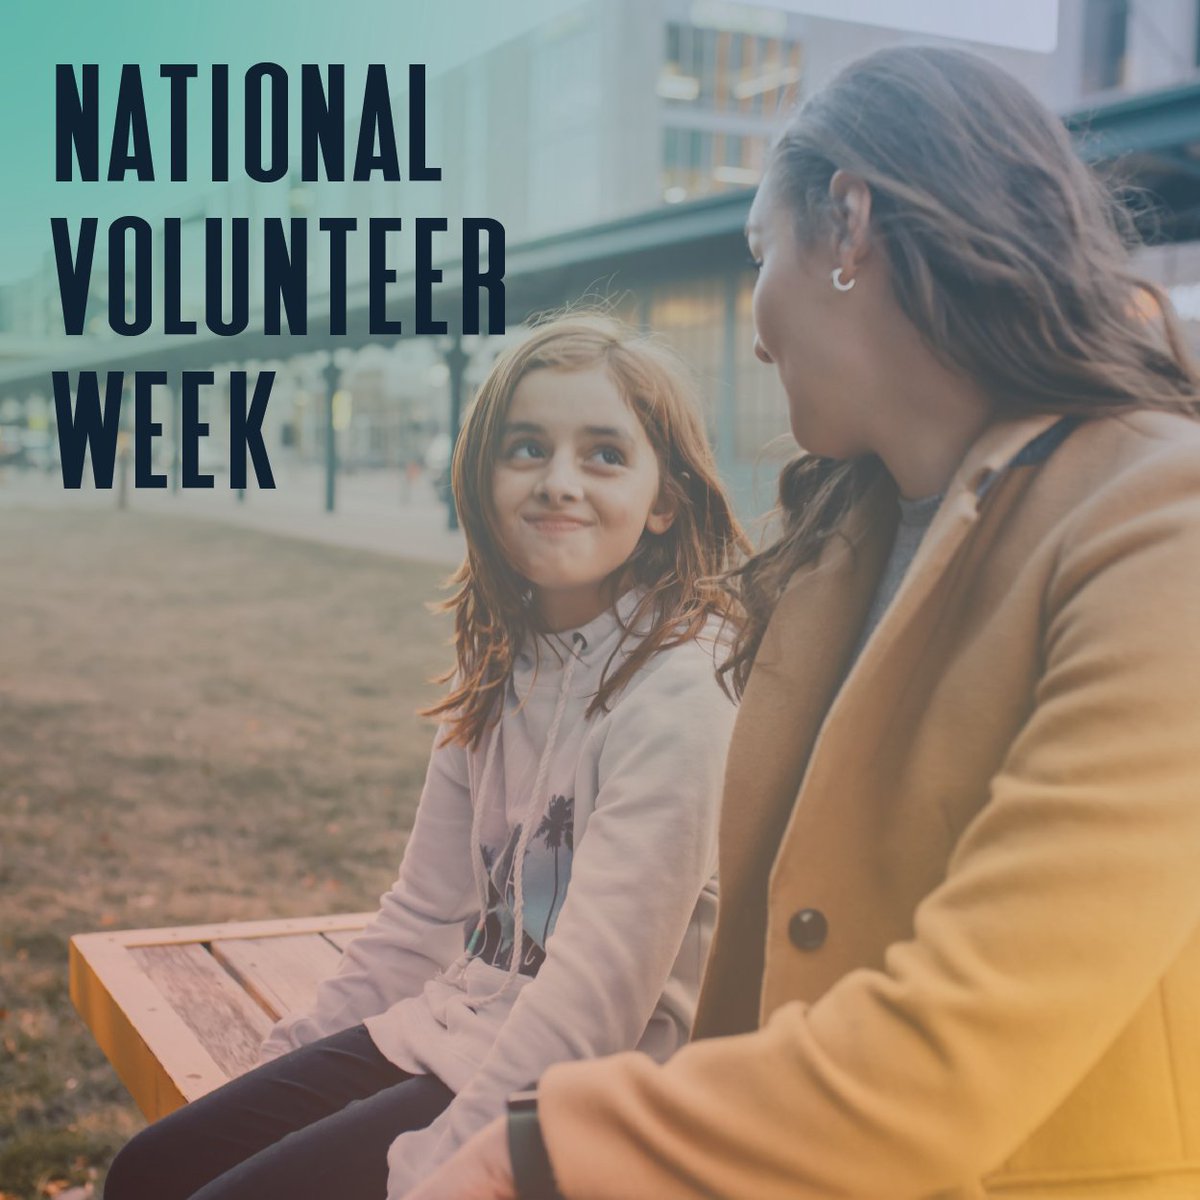 It's #NationalVolunteerWeek and we're sending a HUGE thank you to the mentors and mentoring advocates who work tirelessly to close the mentoring gap. With your dedication, we're building a future where all young people have access to supportive relationships🌟 @MENTORnational